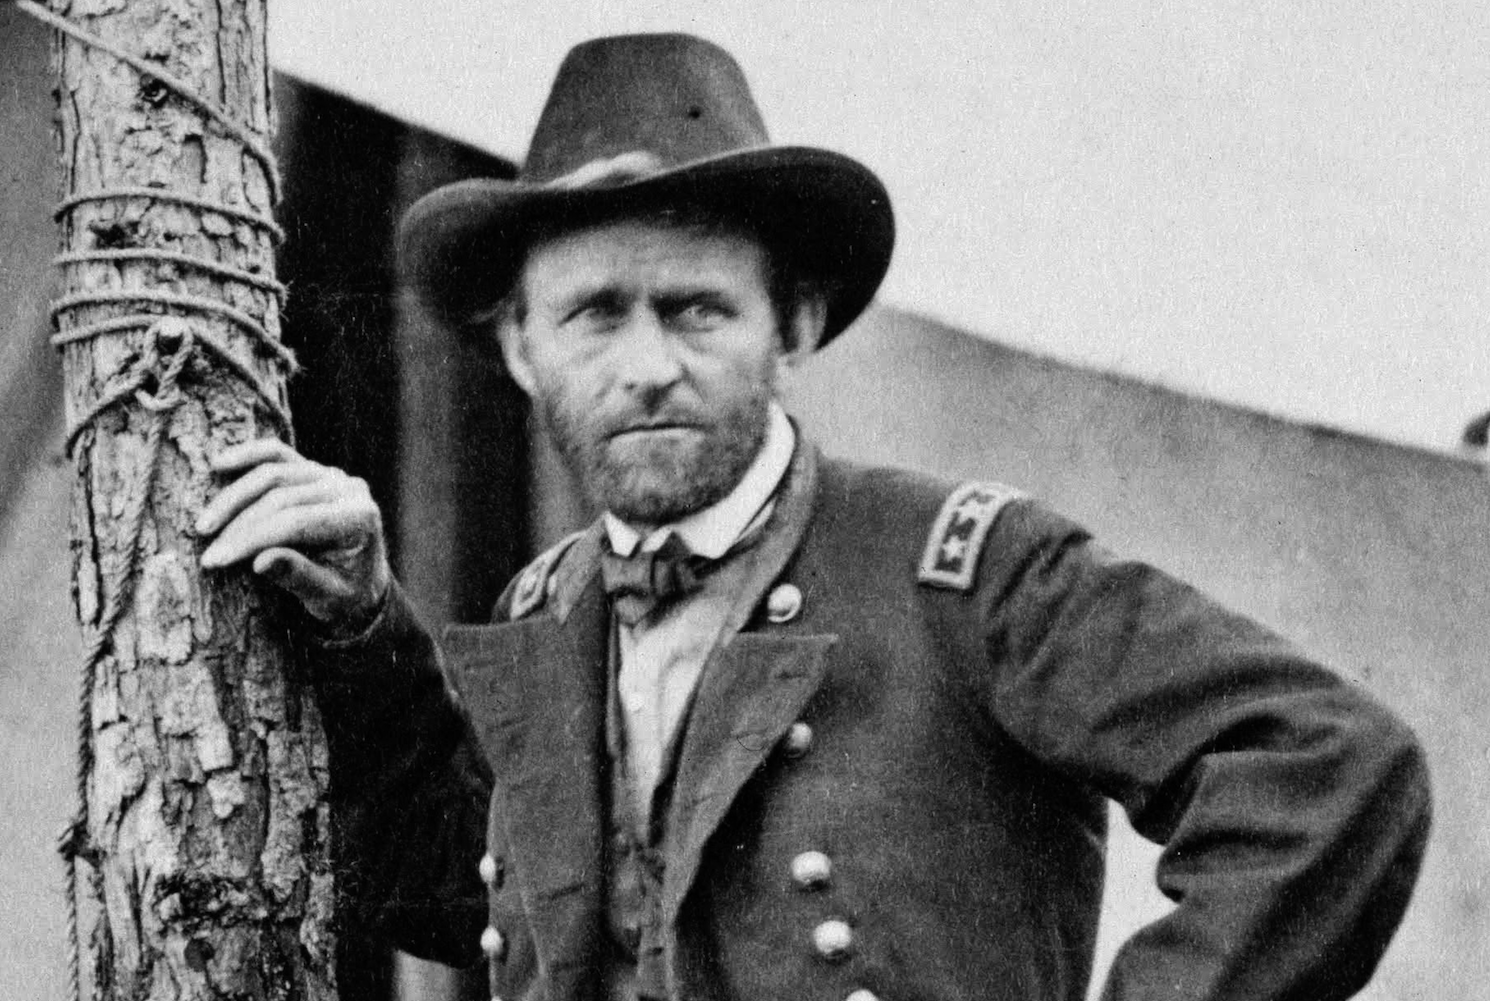 Can You Score Better Than 80% On This U.S. Presidents Quiz? Ulysses S. Grant